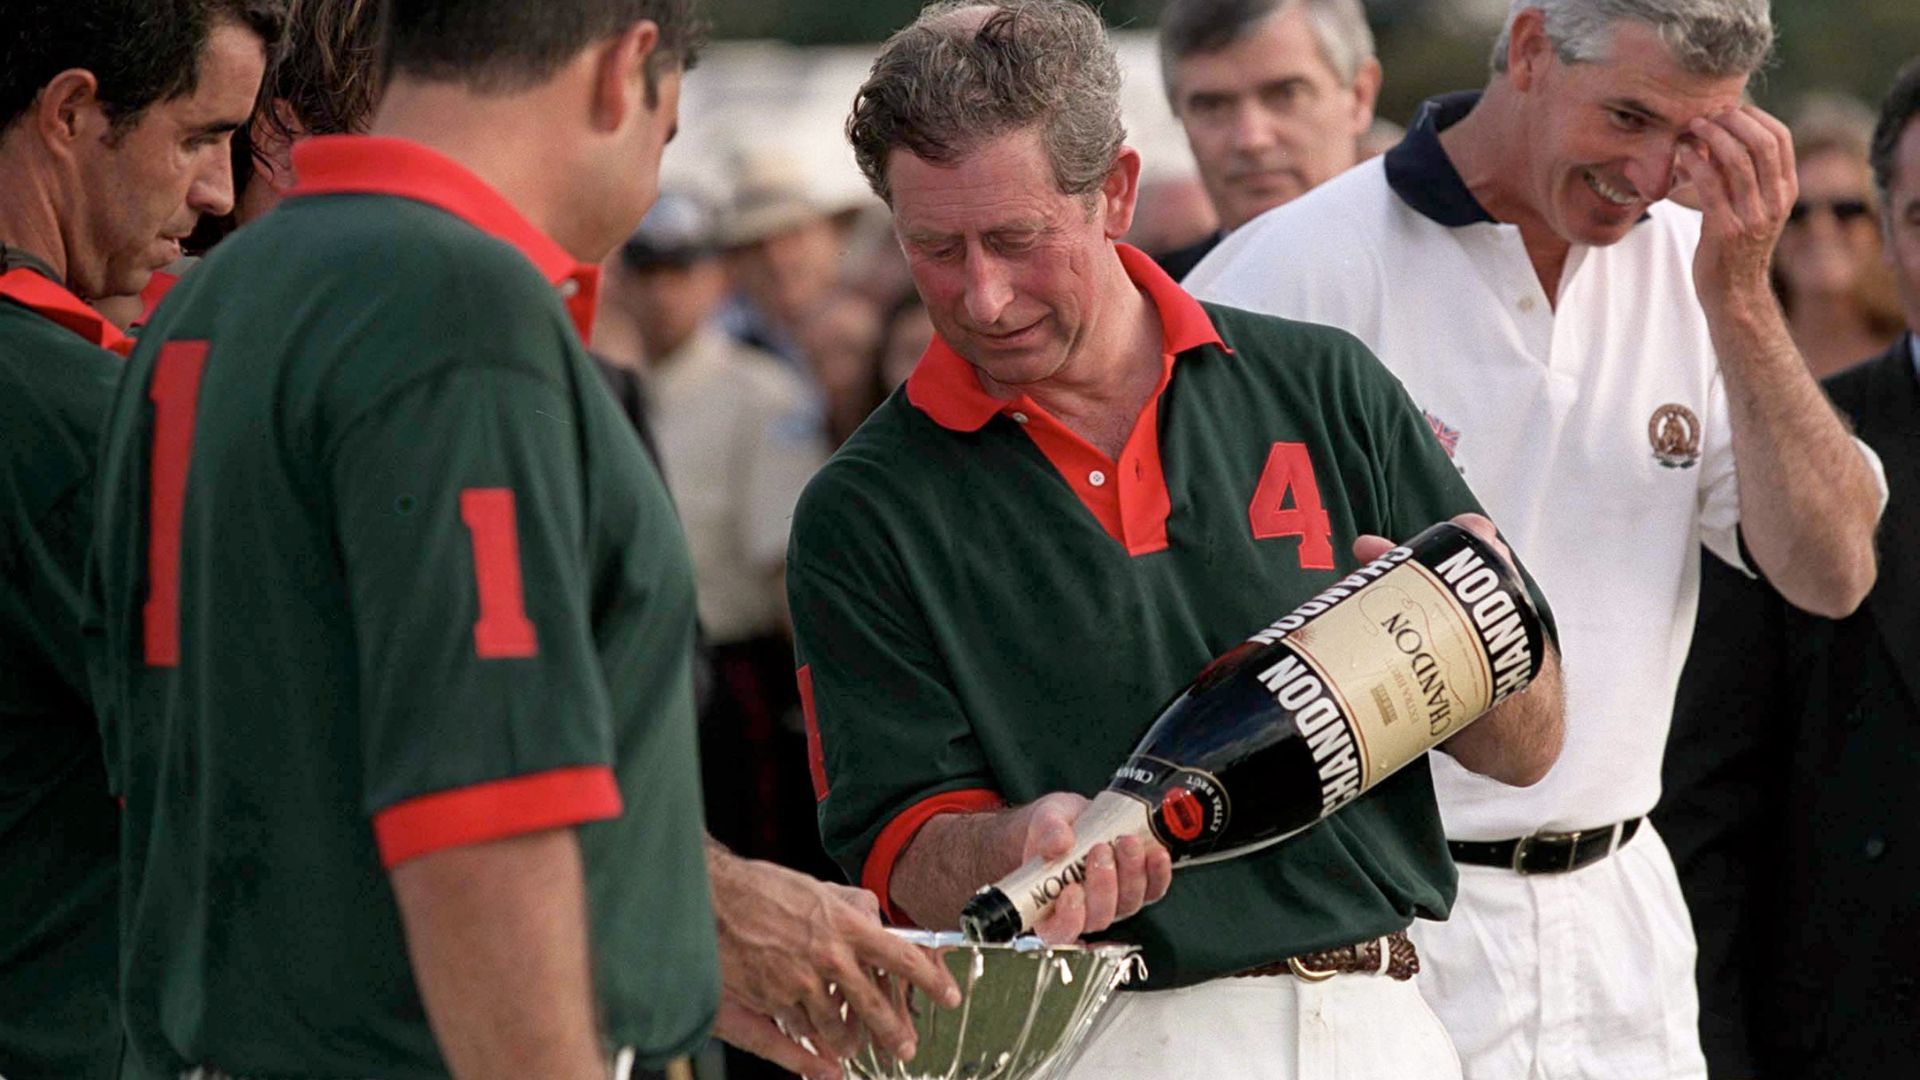 <p>                     What’s better than celebrating a polo victory with a cold glass of champagne? Well, drinking it from your bowl-like trophy of course! Yes, when the then-Prince Charles won his trophy match at the Hurlingham Club in March of 1999 in Buenos Aires, Argentina, he was in a celebratory mood and drank the fizz out of the silver trophy.                   </p>